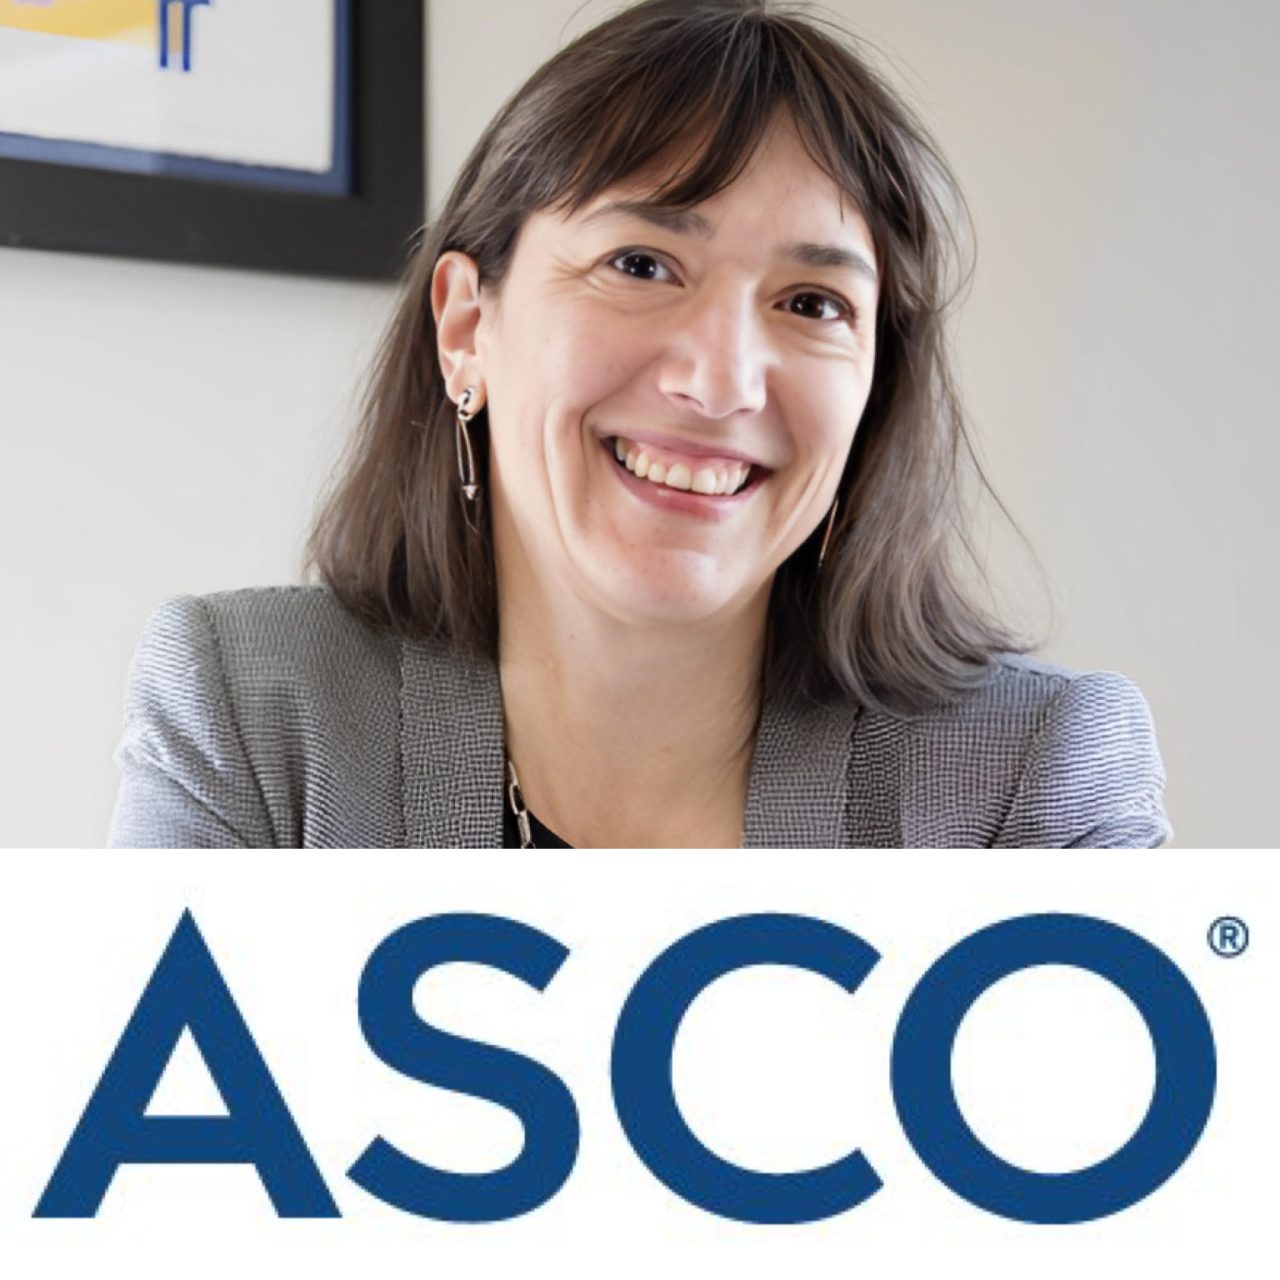 We proudly endorse Monica Bertagnolli as the next Director of National Institutes of Health. – ASCO